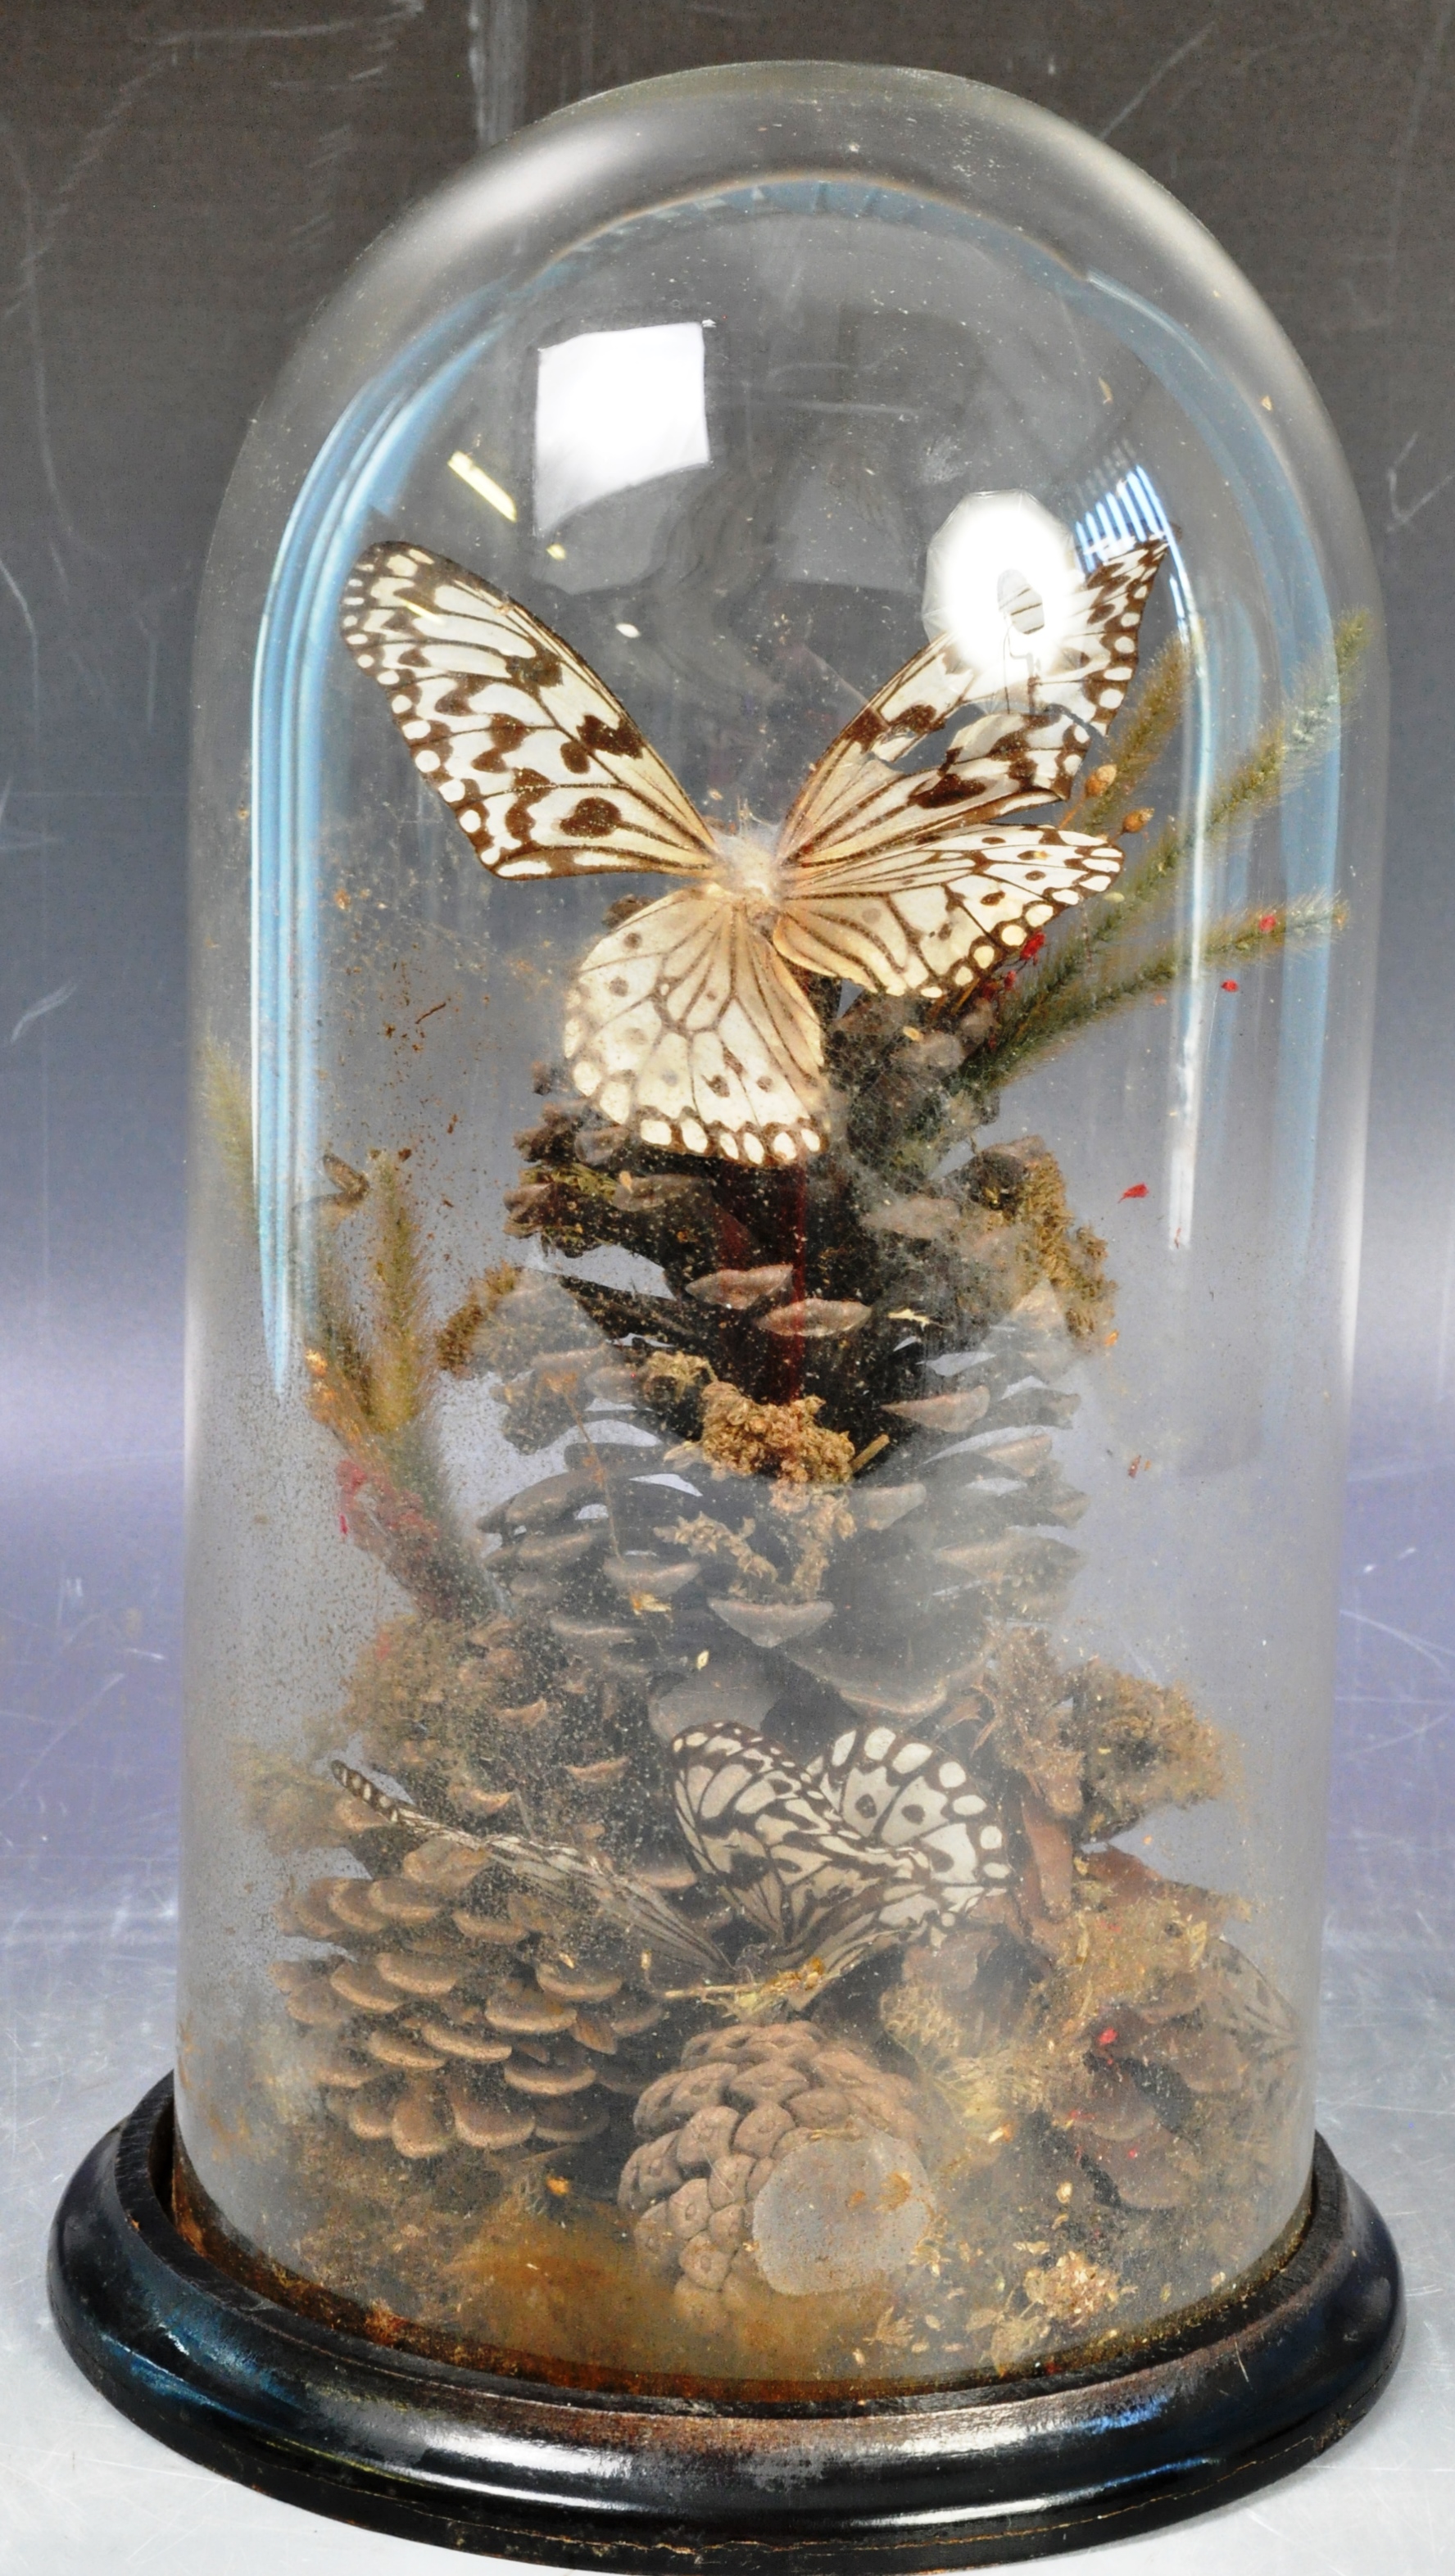 19TH CENTURY ANTIQUE VICTORIAN TAXIDERMY BUTTERFLIES IN GLASS DOME - Image 5 of 11